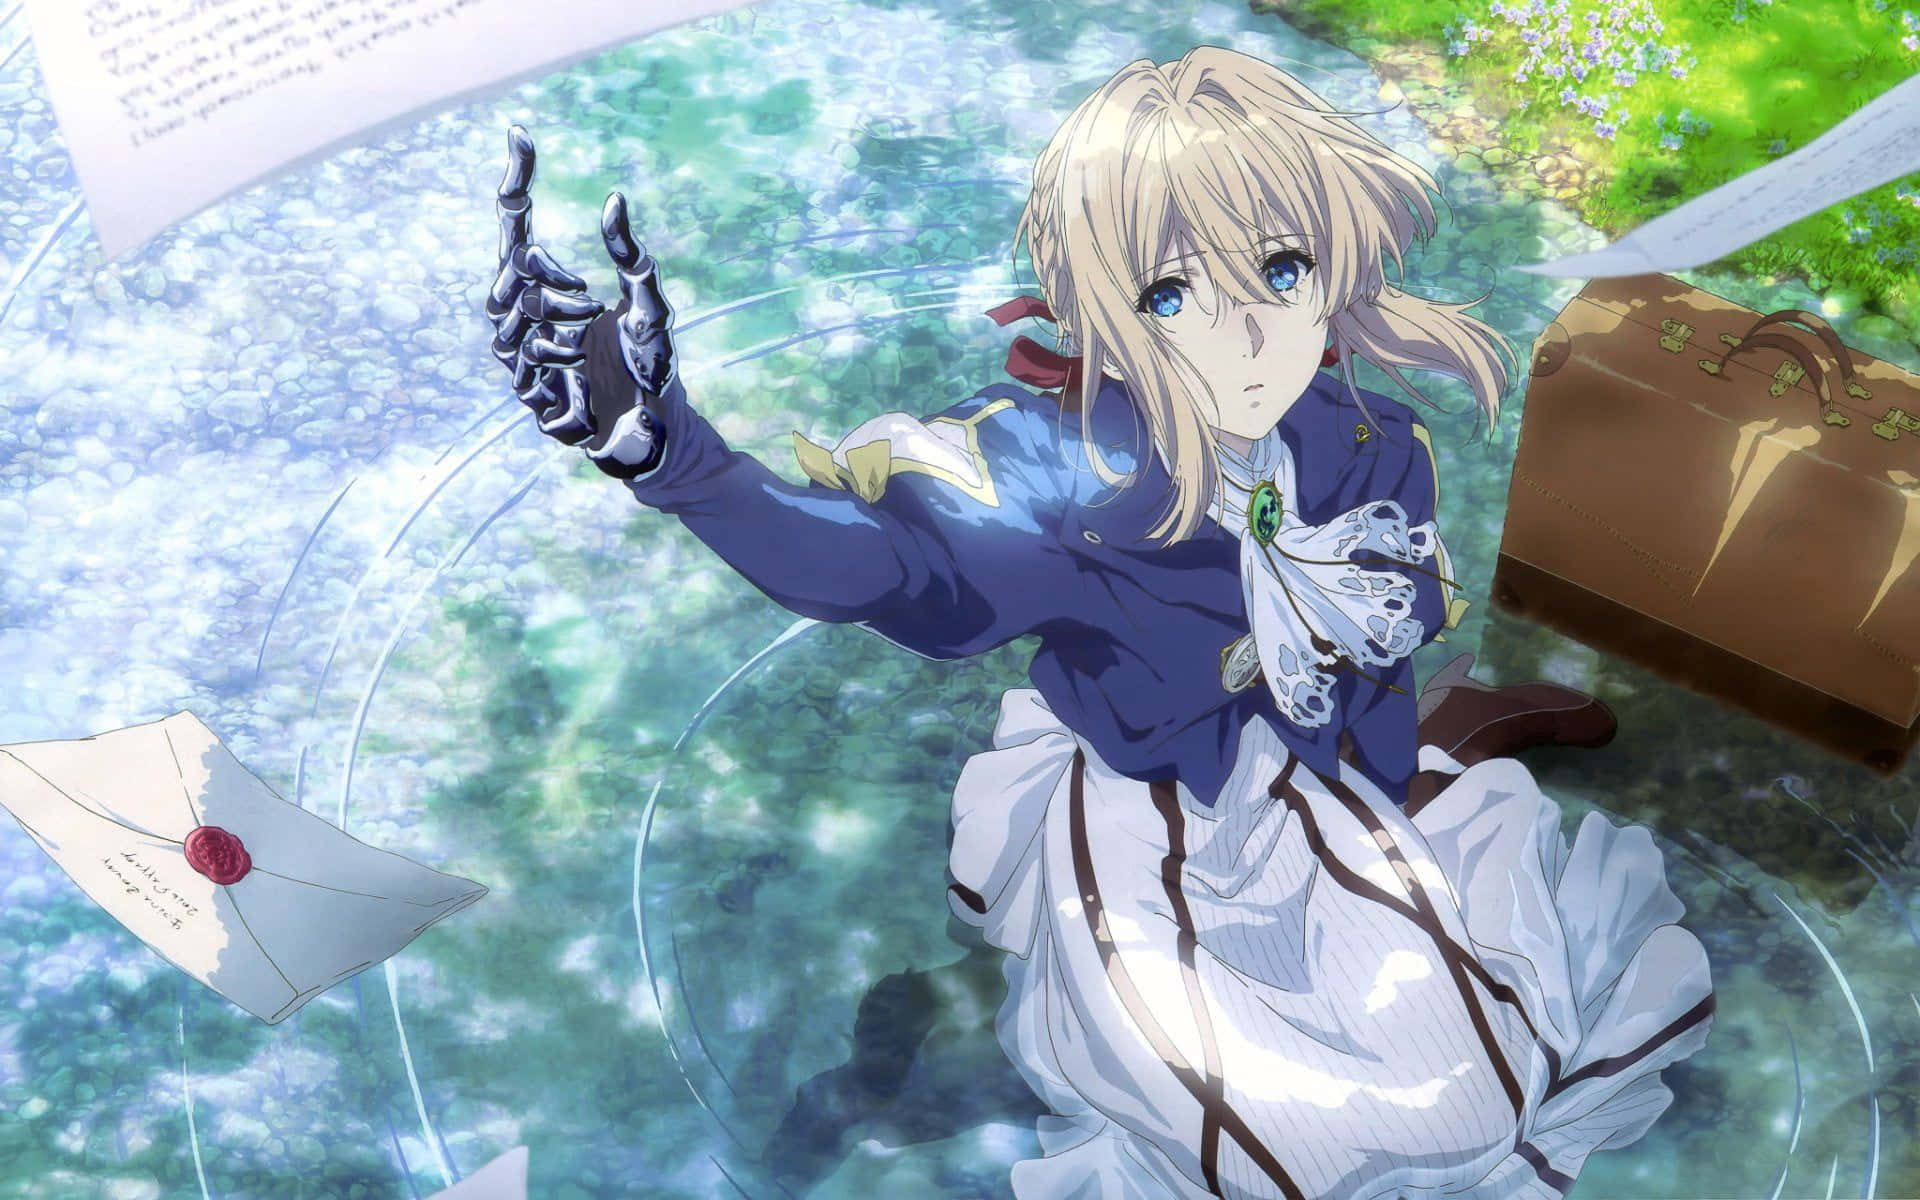 Inspiring view of the world of Violet Evergarden